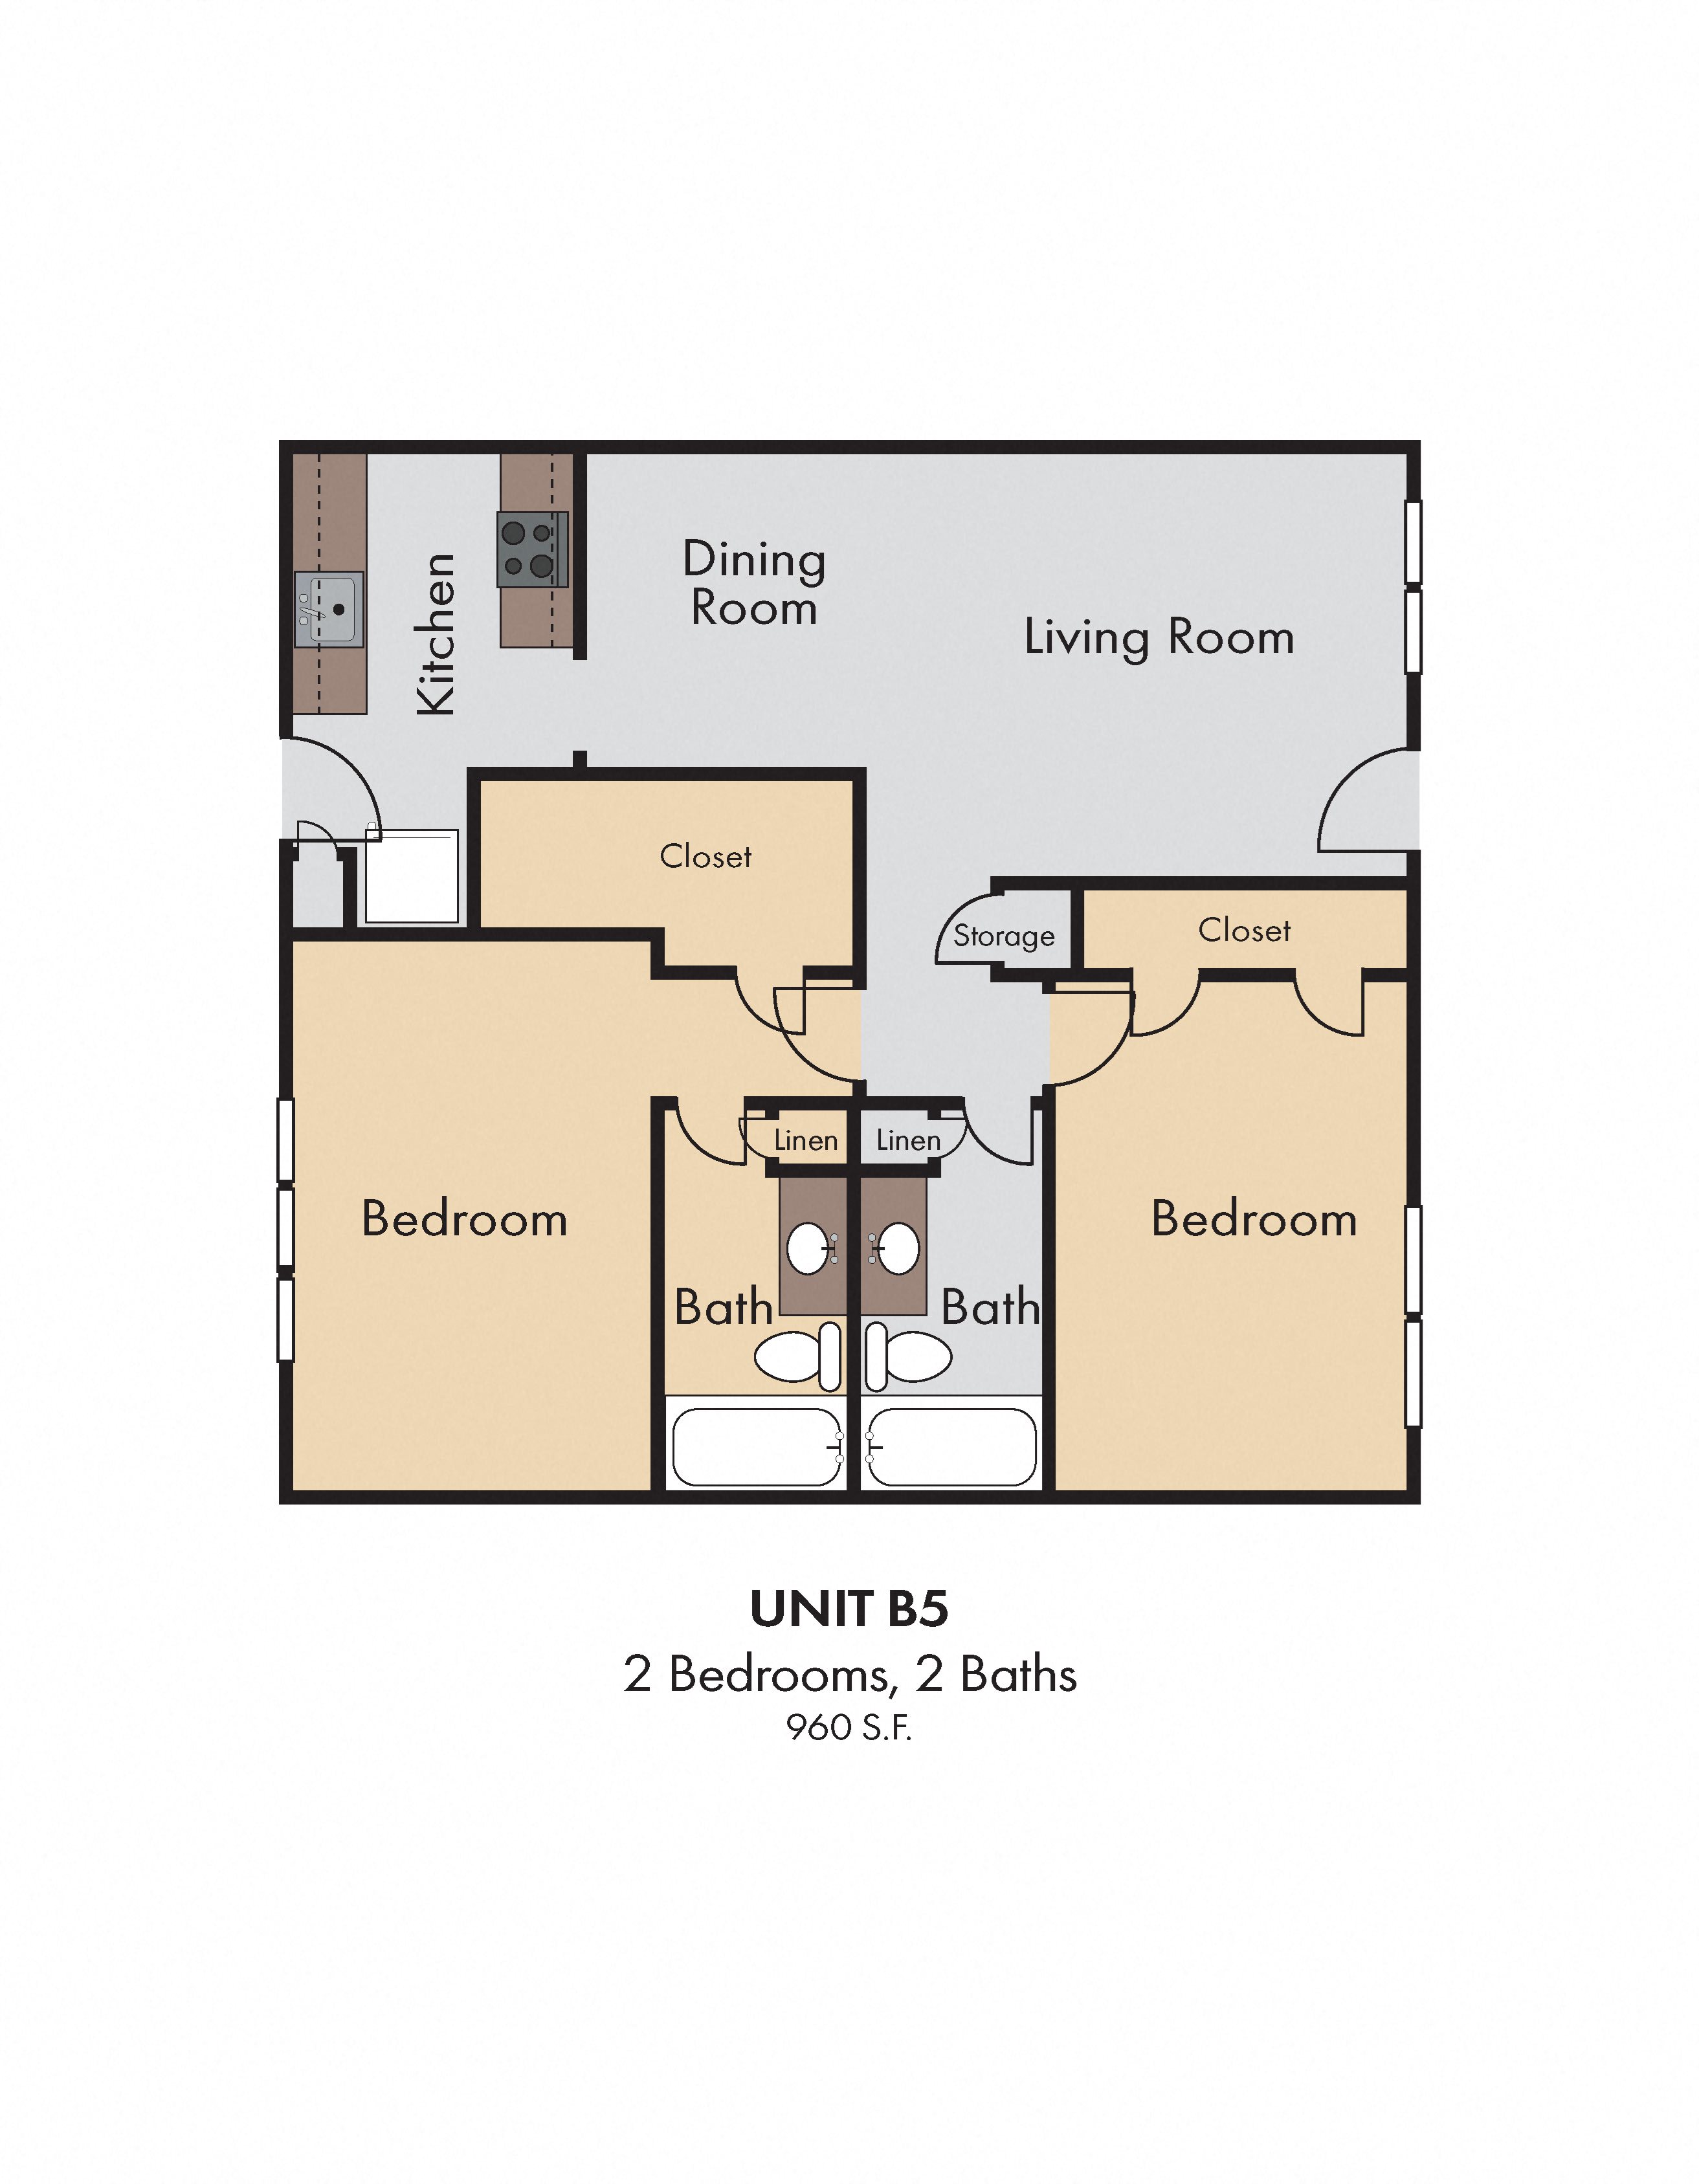 Floor Plans of The Paddock on Park Row Apartment Homes in